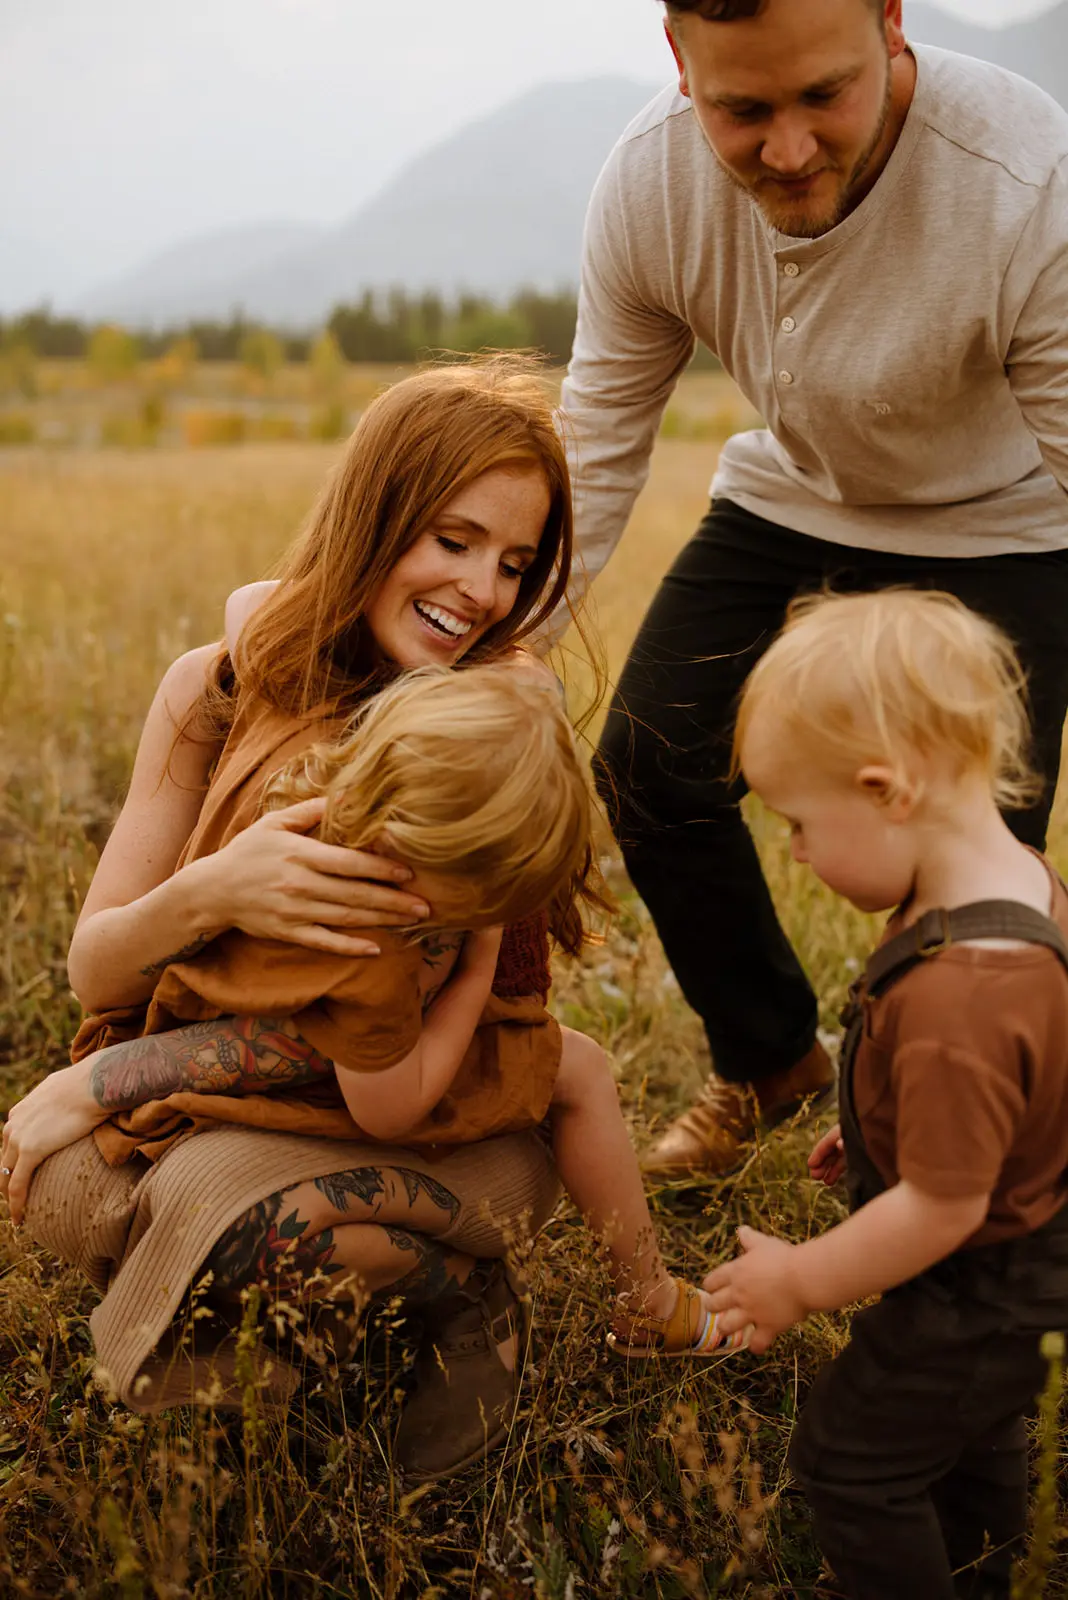 Joyful family moment in a golden field, with a smiling redhead mother embracing her laughing child, as a toddler reaches out to them and the father looks on, all set against a mountainous backdrop.